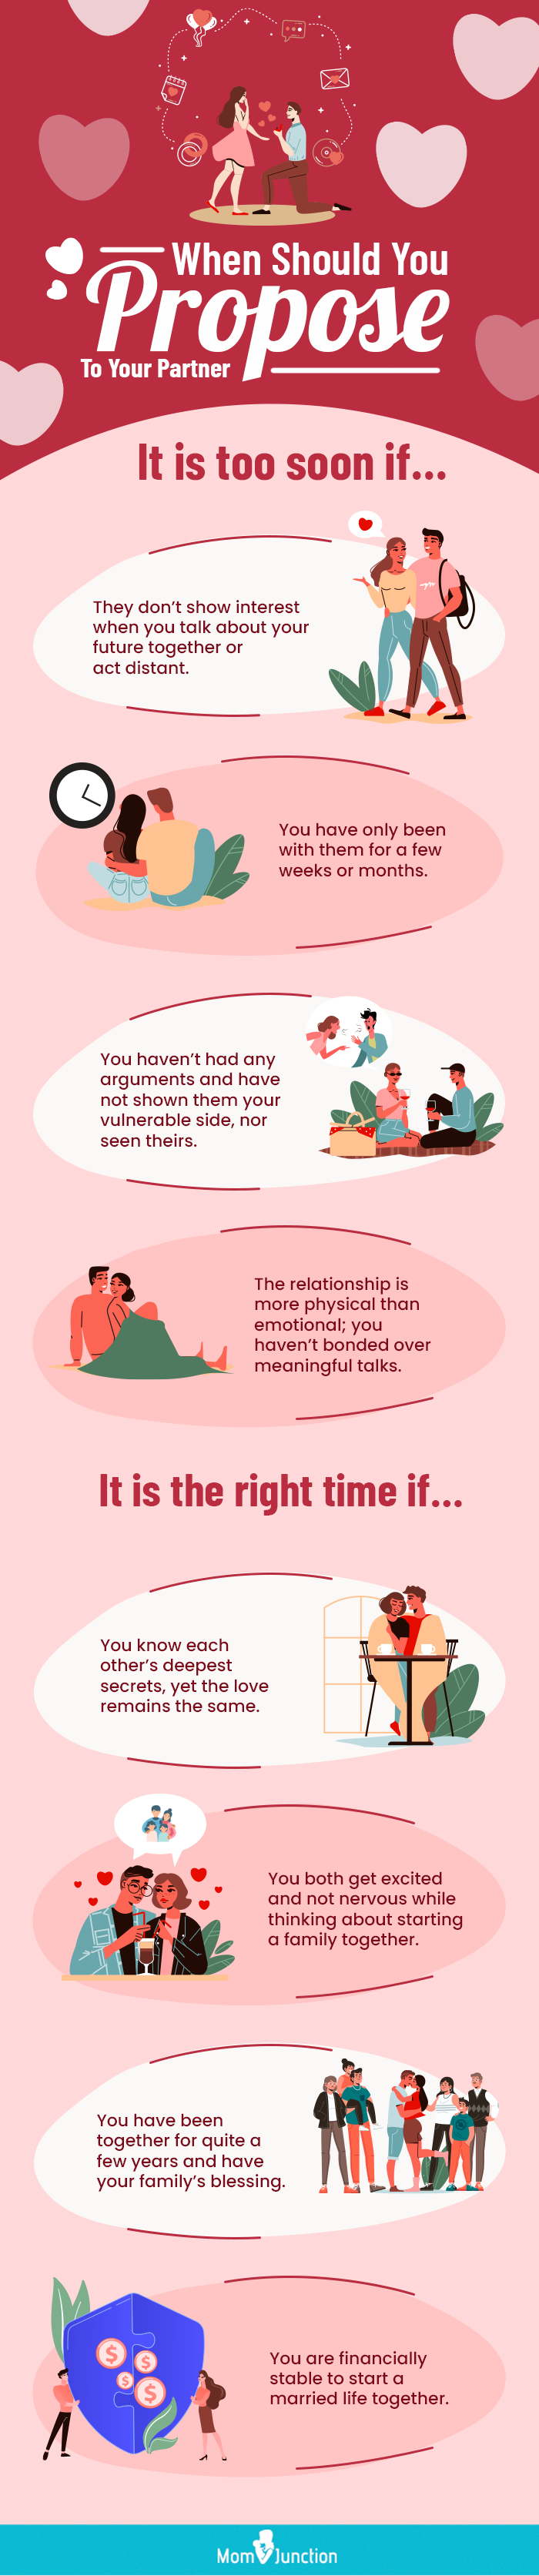 when should you propose to your partner (infographic)